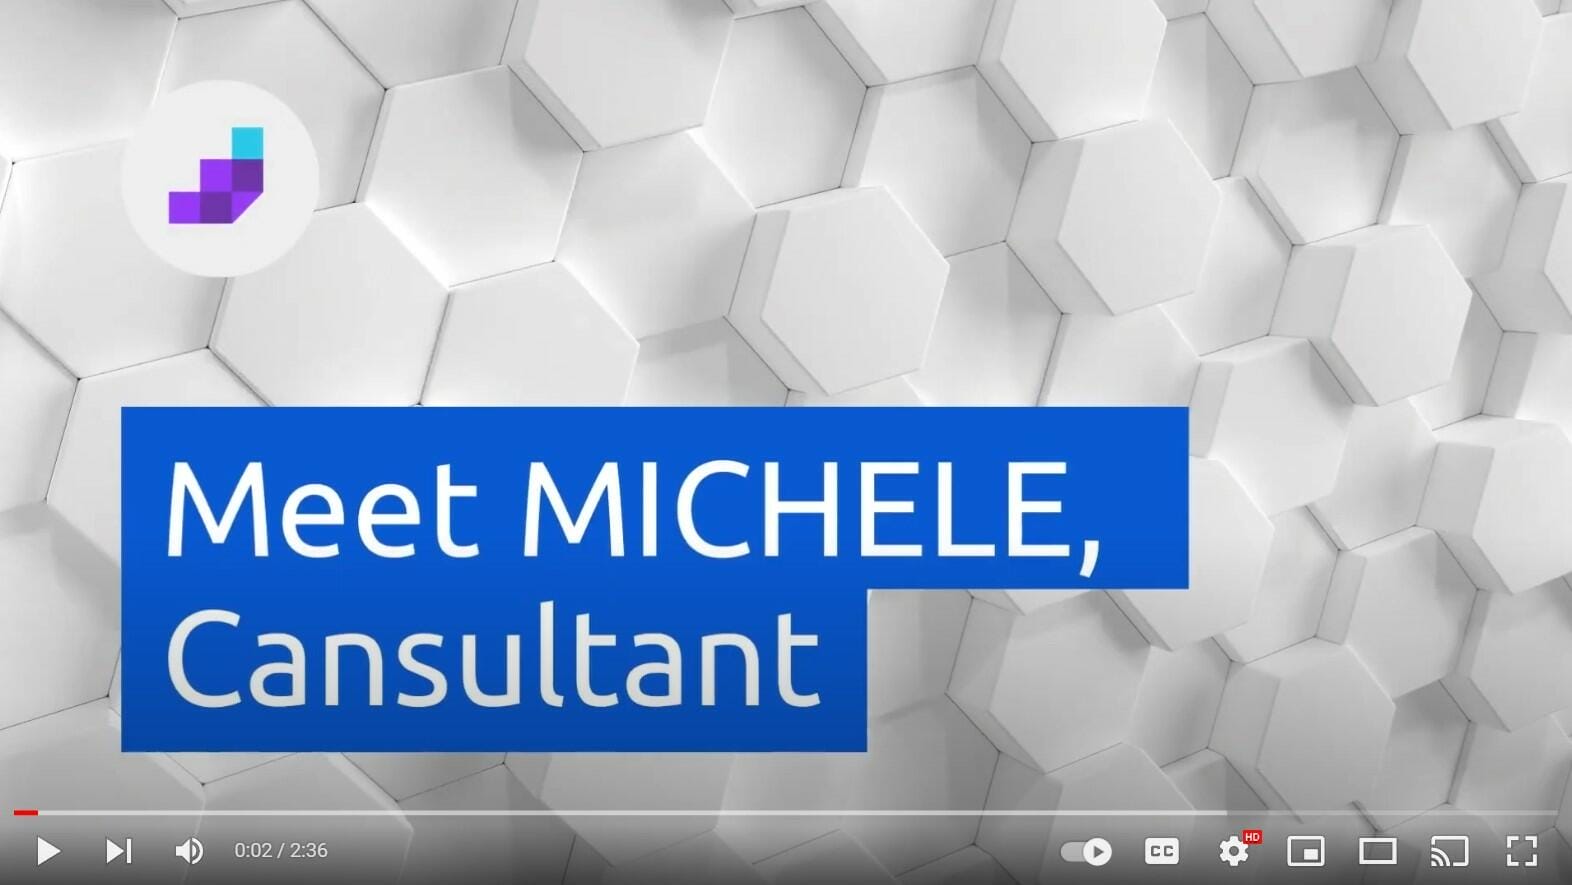 Introducing Michele D, CEO Advisory Consultant